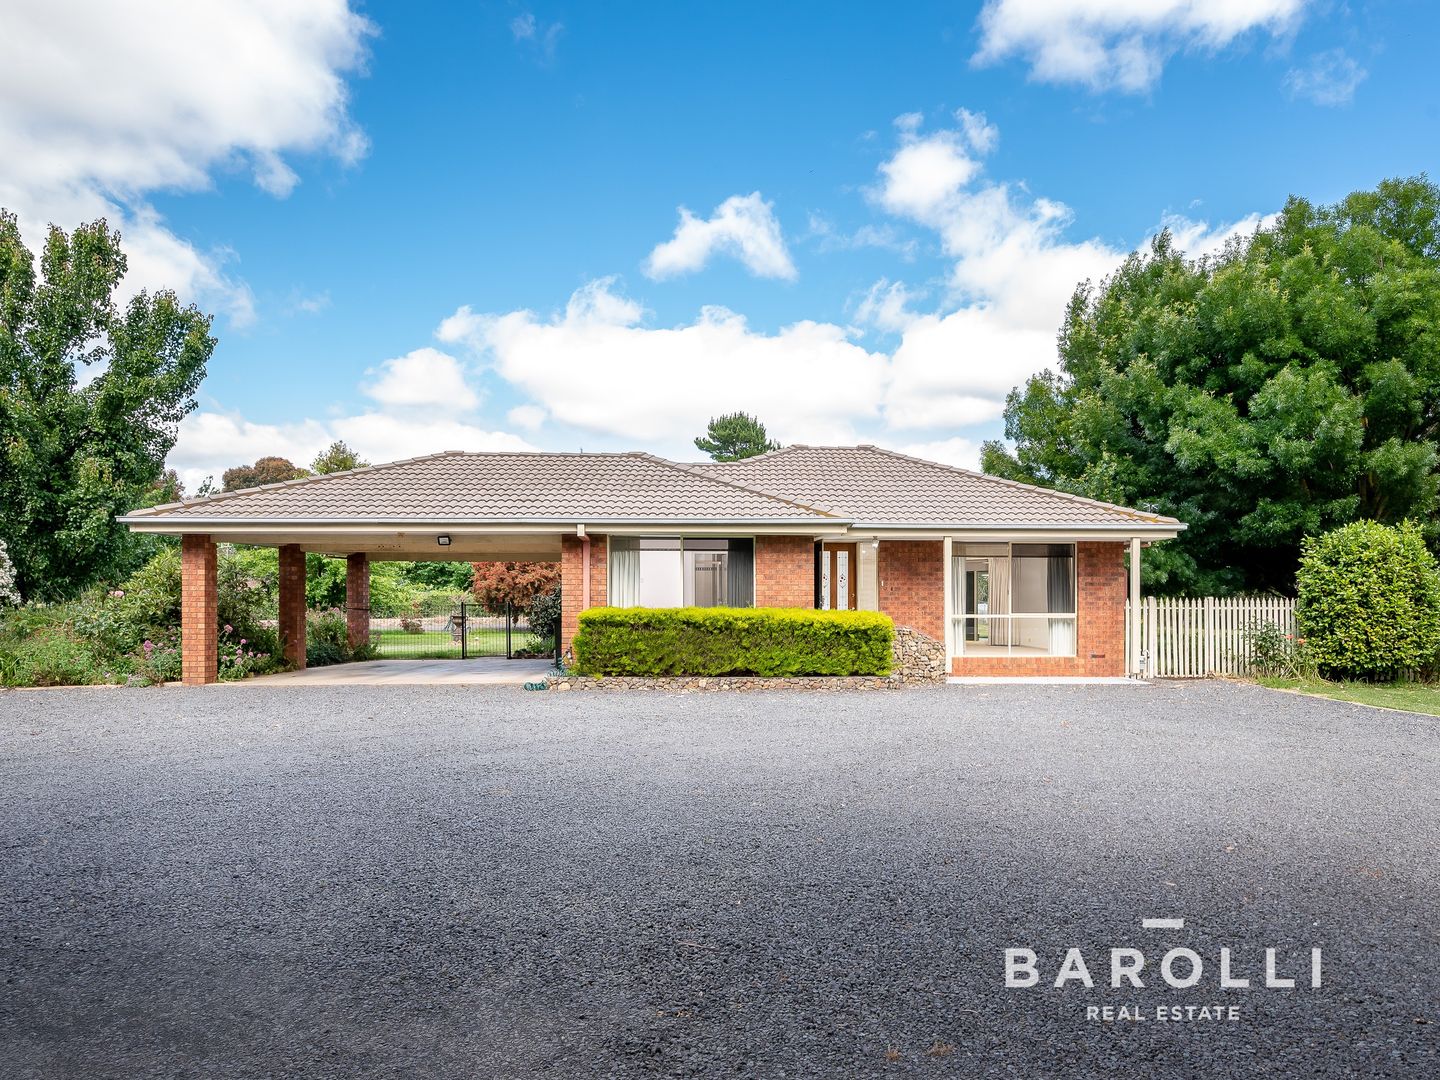 Sold 6 Brian Court Grahamvale VIC 3631 on 31 Jul 2023 2018238709